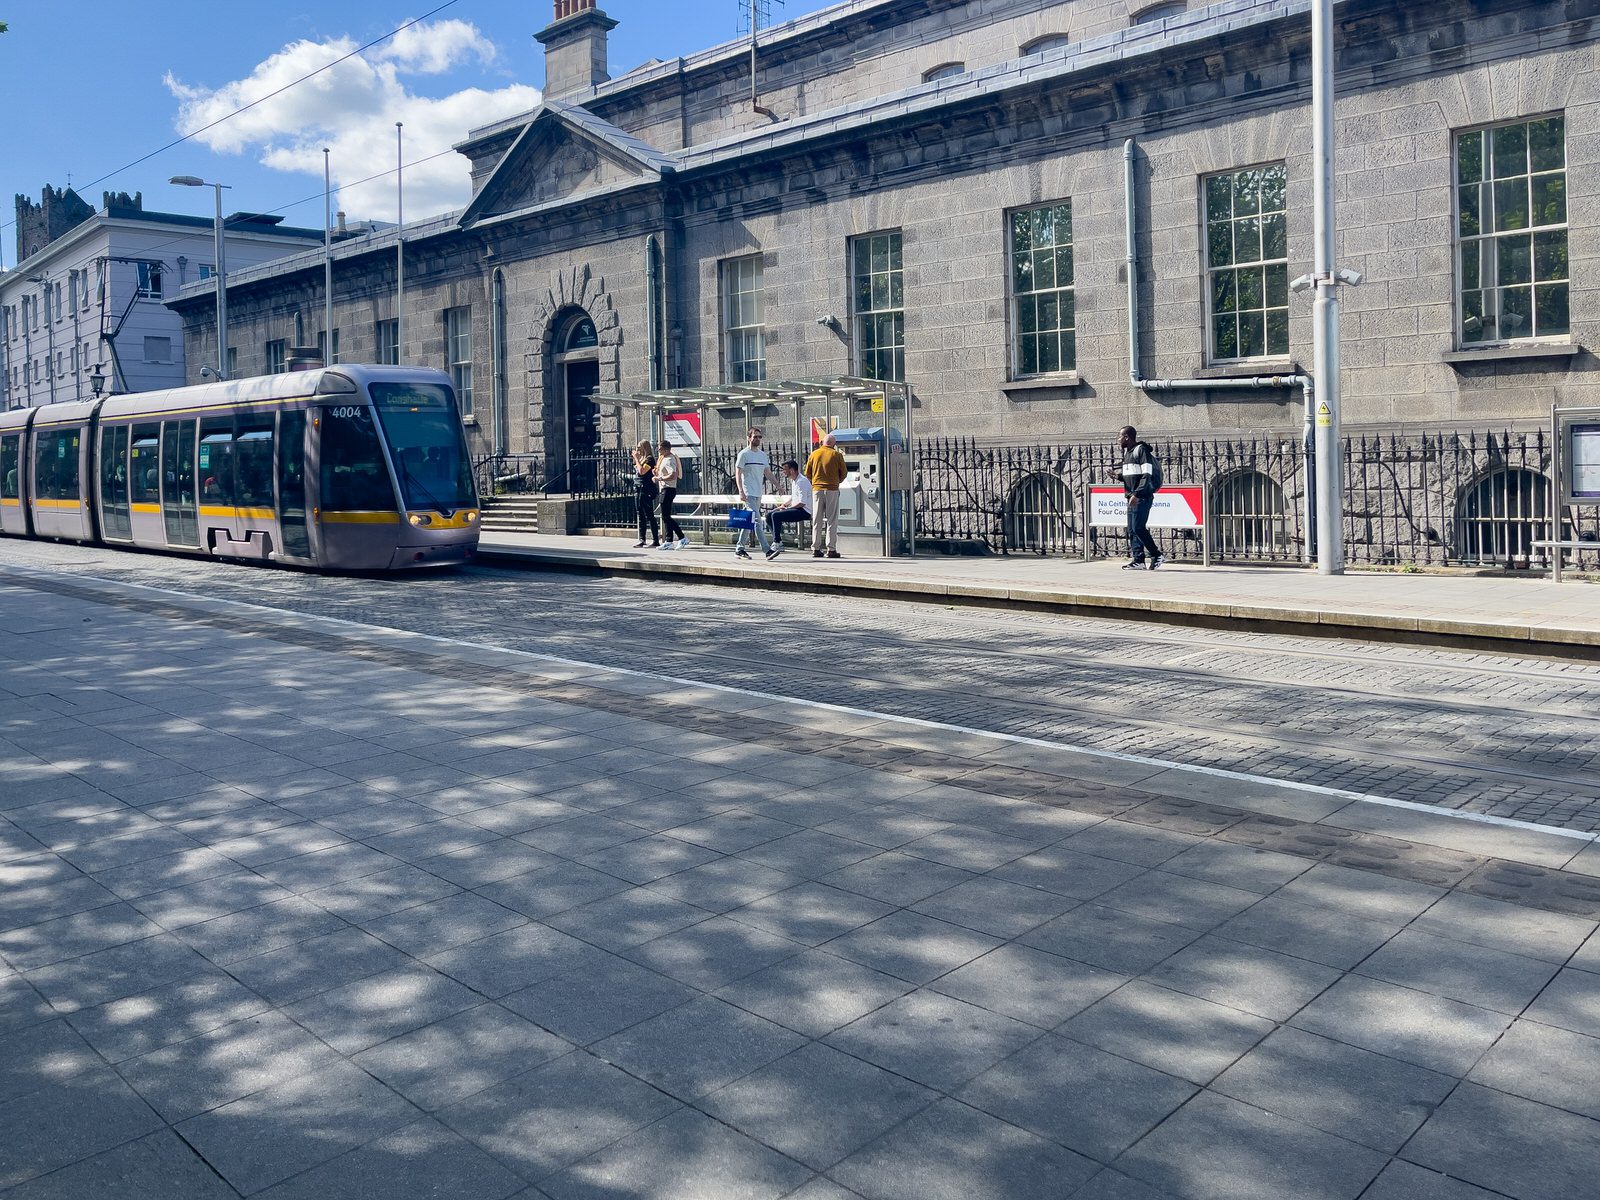 THE LUAS FOUR COURTS TRAM STOP [THERE IS MUCH TO BE SEEN HERE]-234101-1